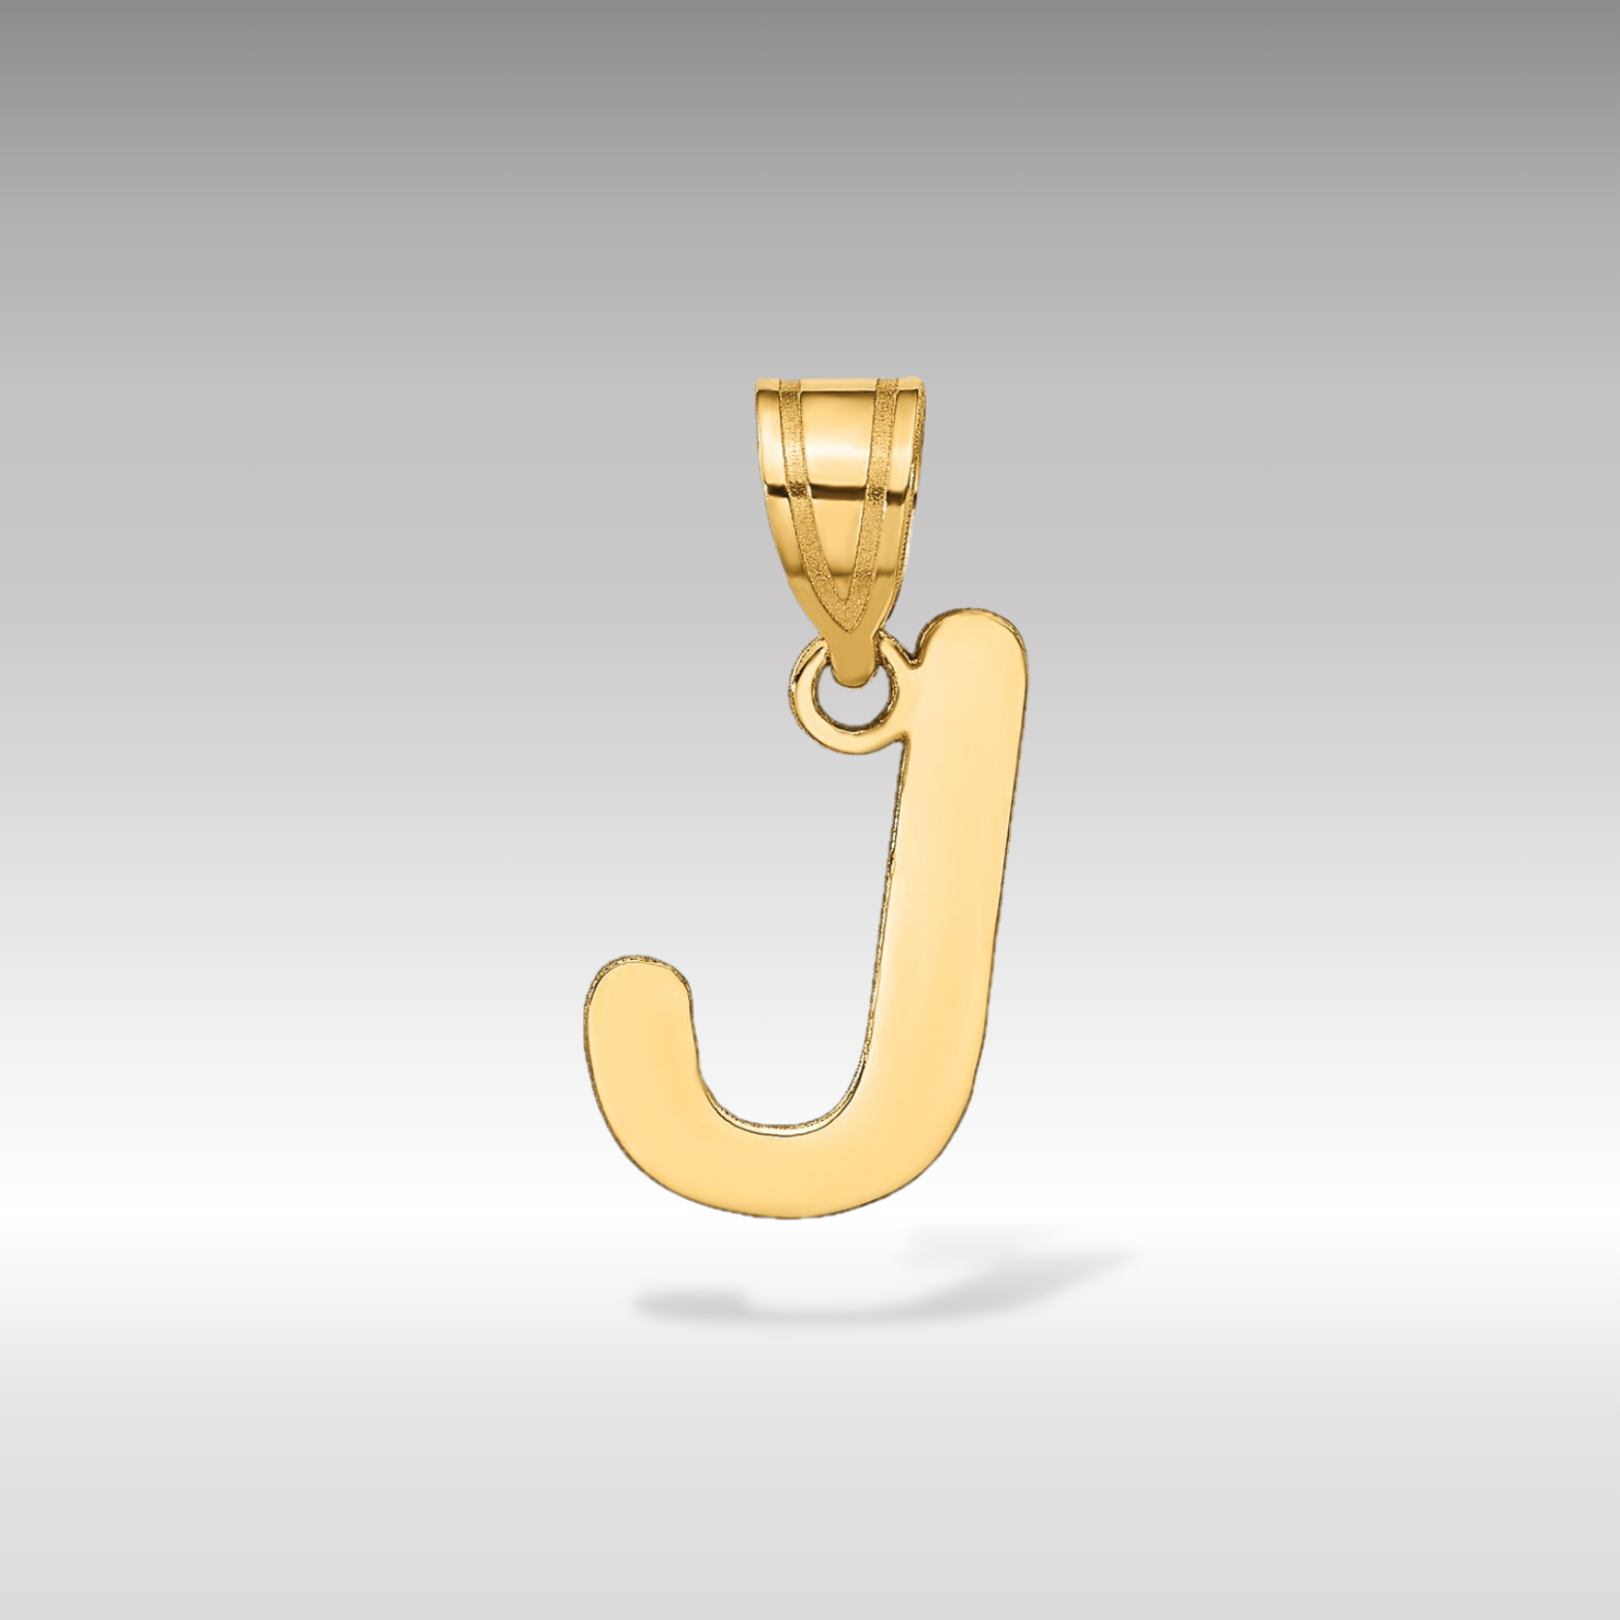 14k Gold Polished Letter 'J' Initial Charm - Charlie & Co. Jewelry